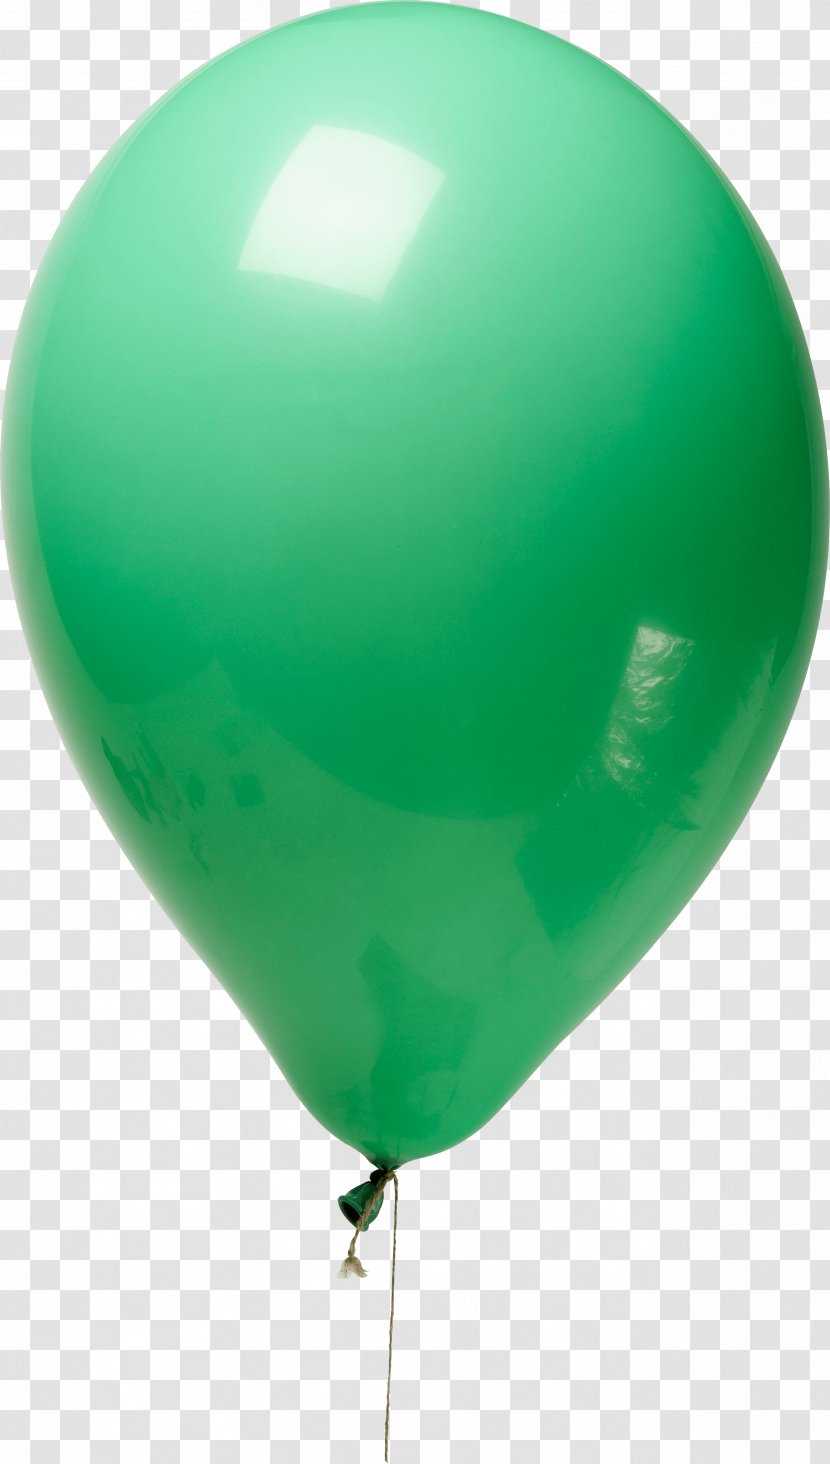 Toy Balloon Raster Graphics Clip Art - Green - Image Transparent PNG